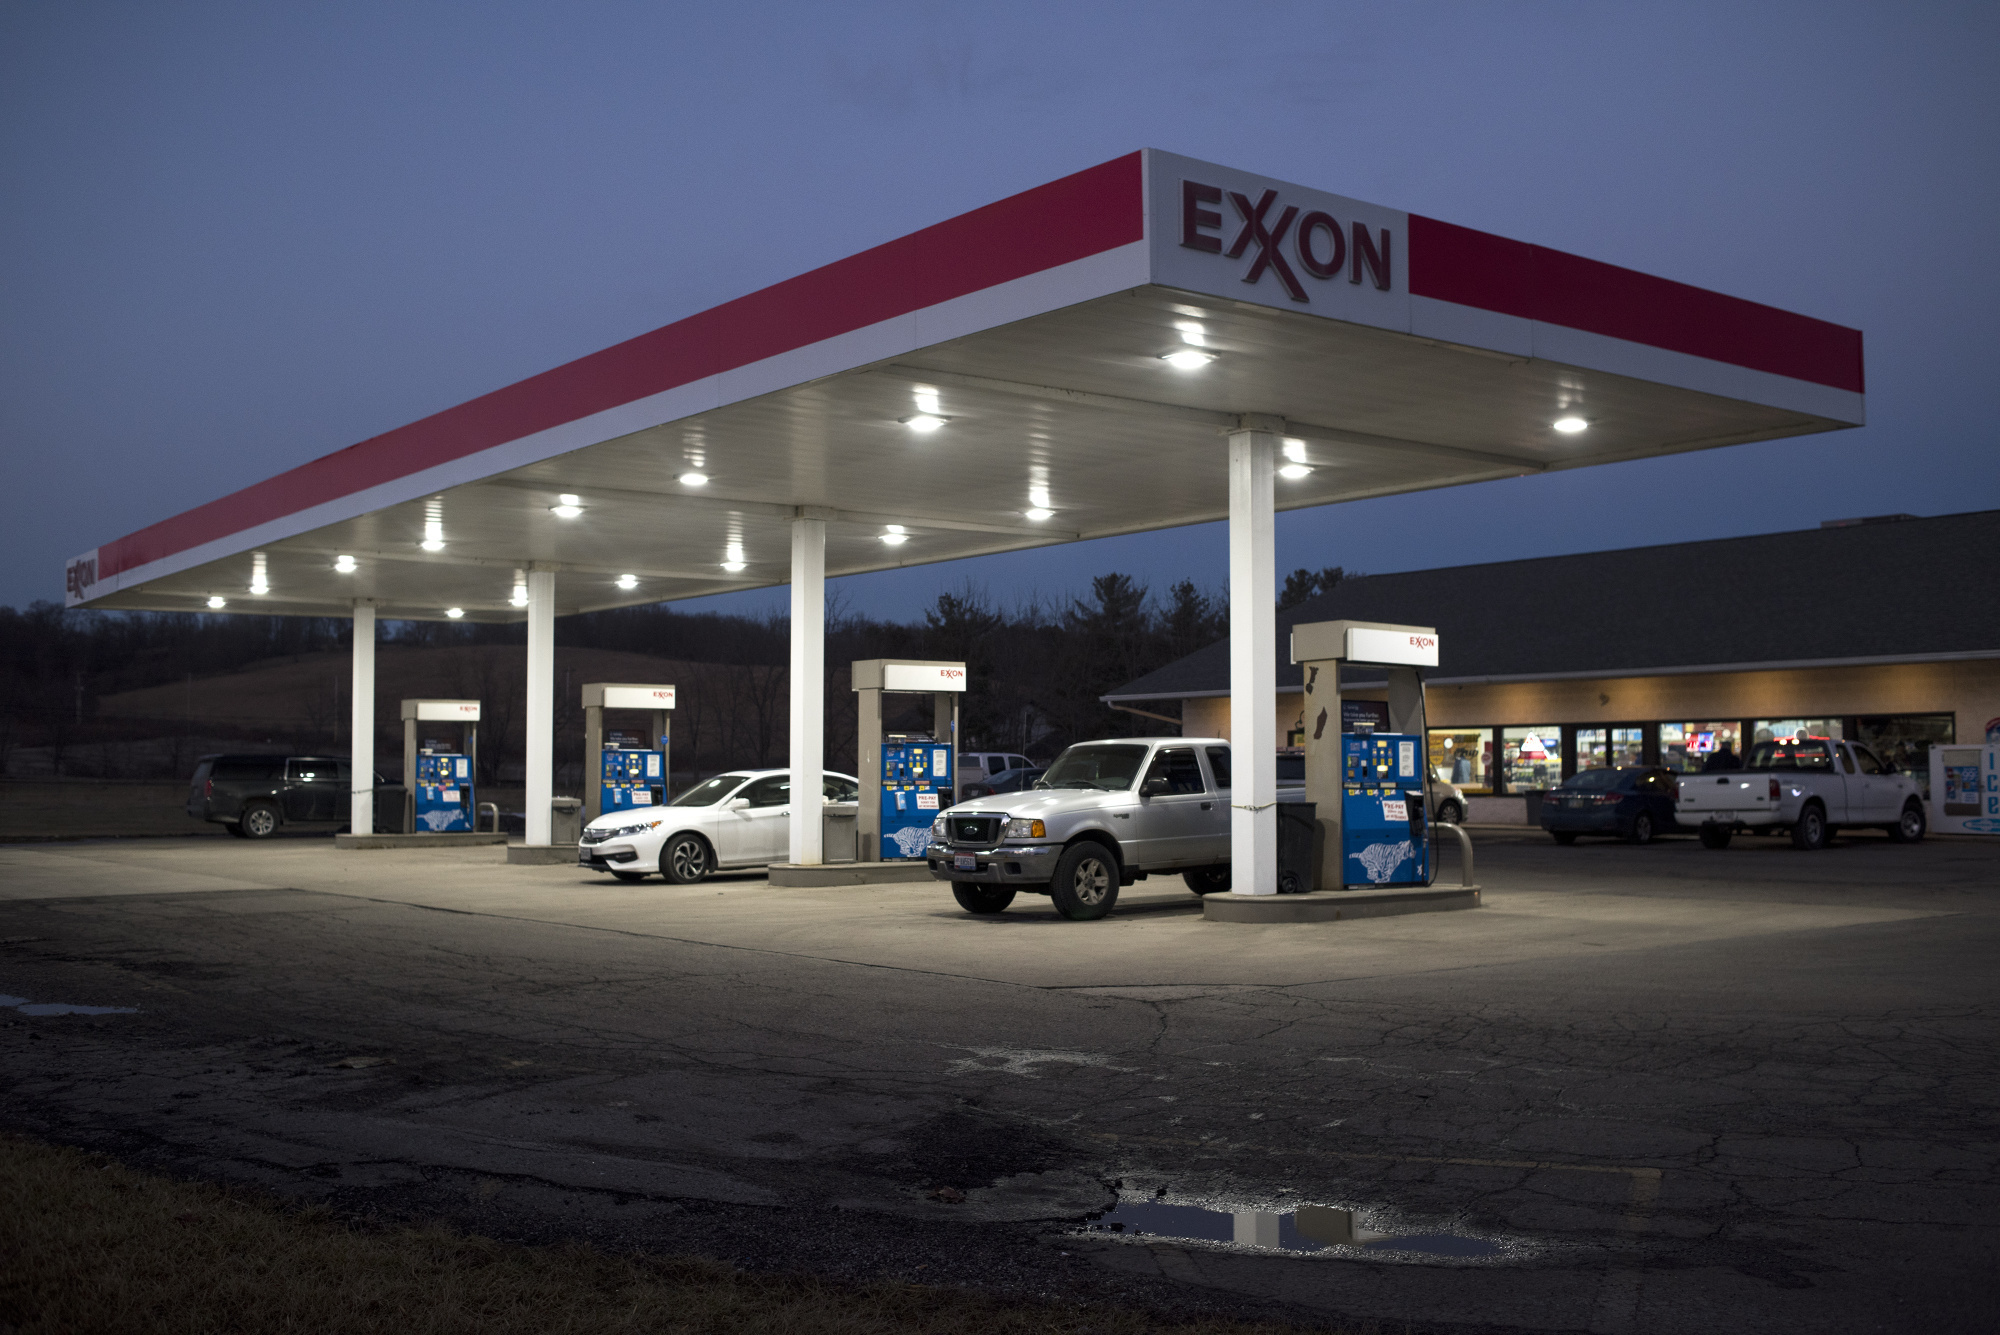 Customers fuel vehicles at an Exxon Mobil Corp. gas station in Nashport, Ohio, U.S., on Friday, Jan. 26, 2018. Photographer: Ty Wright/Bloomberg